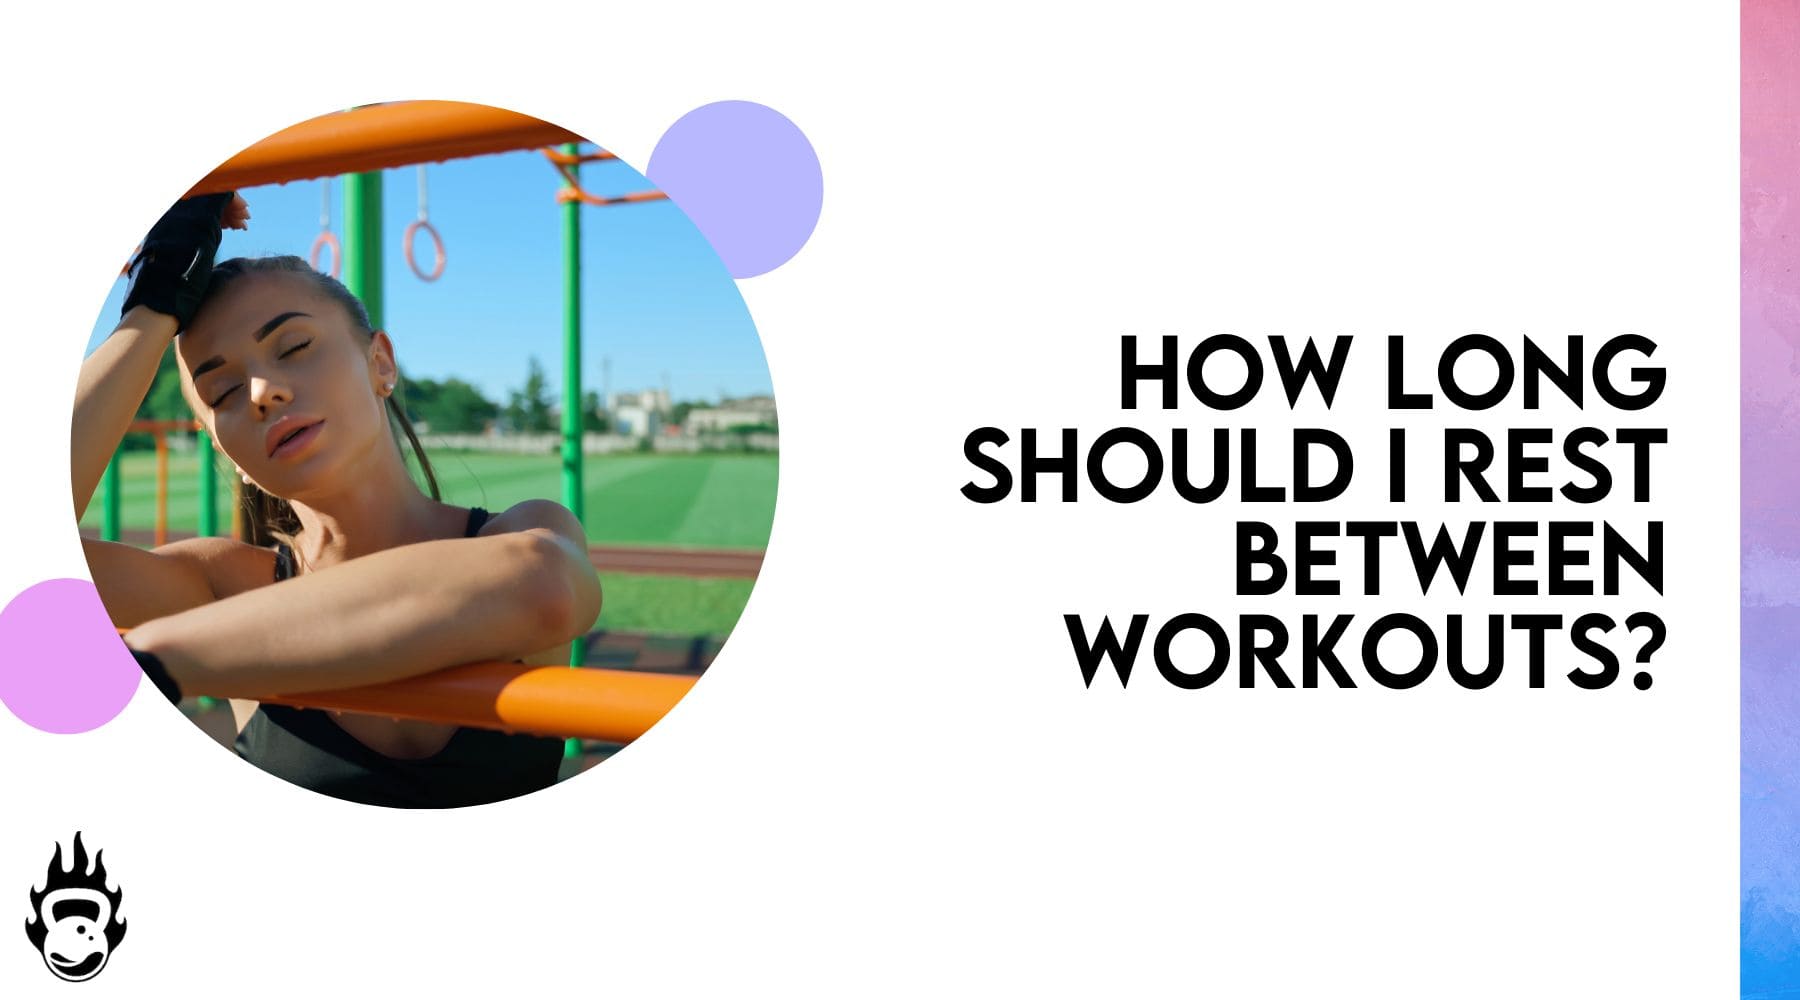 How Long Should I Rest Between Workouts?